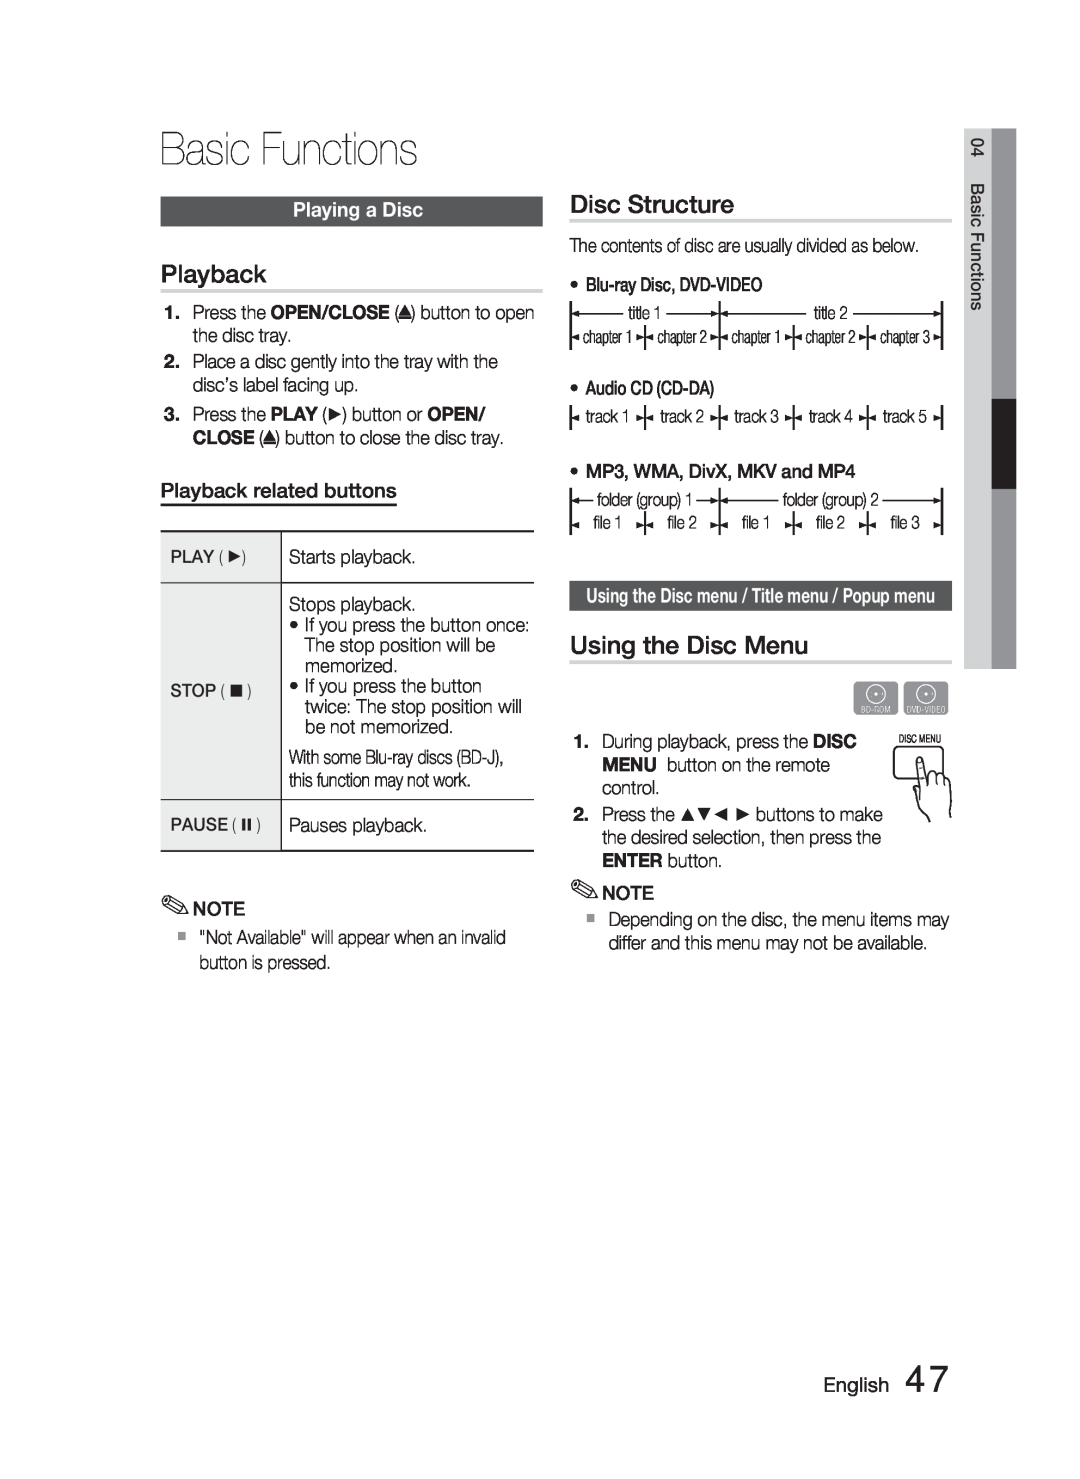 Samsung AH68-02279R user manual Basic Functions, Playback, Disc Structure, Using the Disc Menu, Playing a Disc, English 